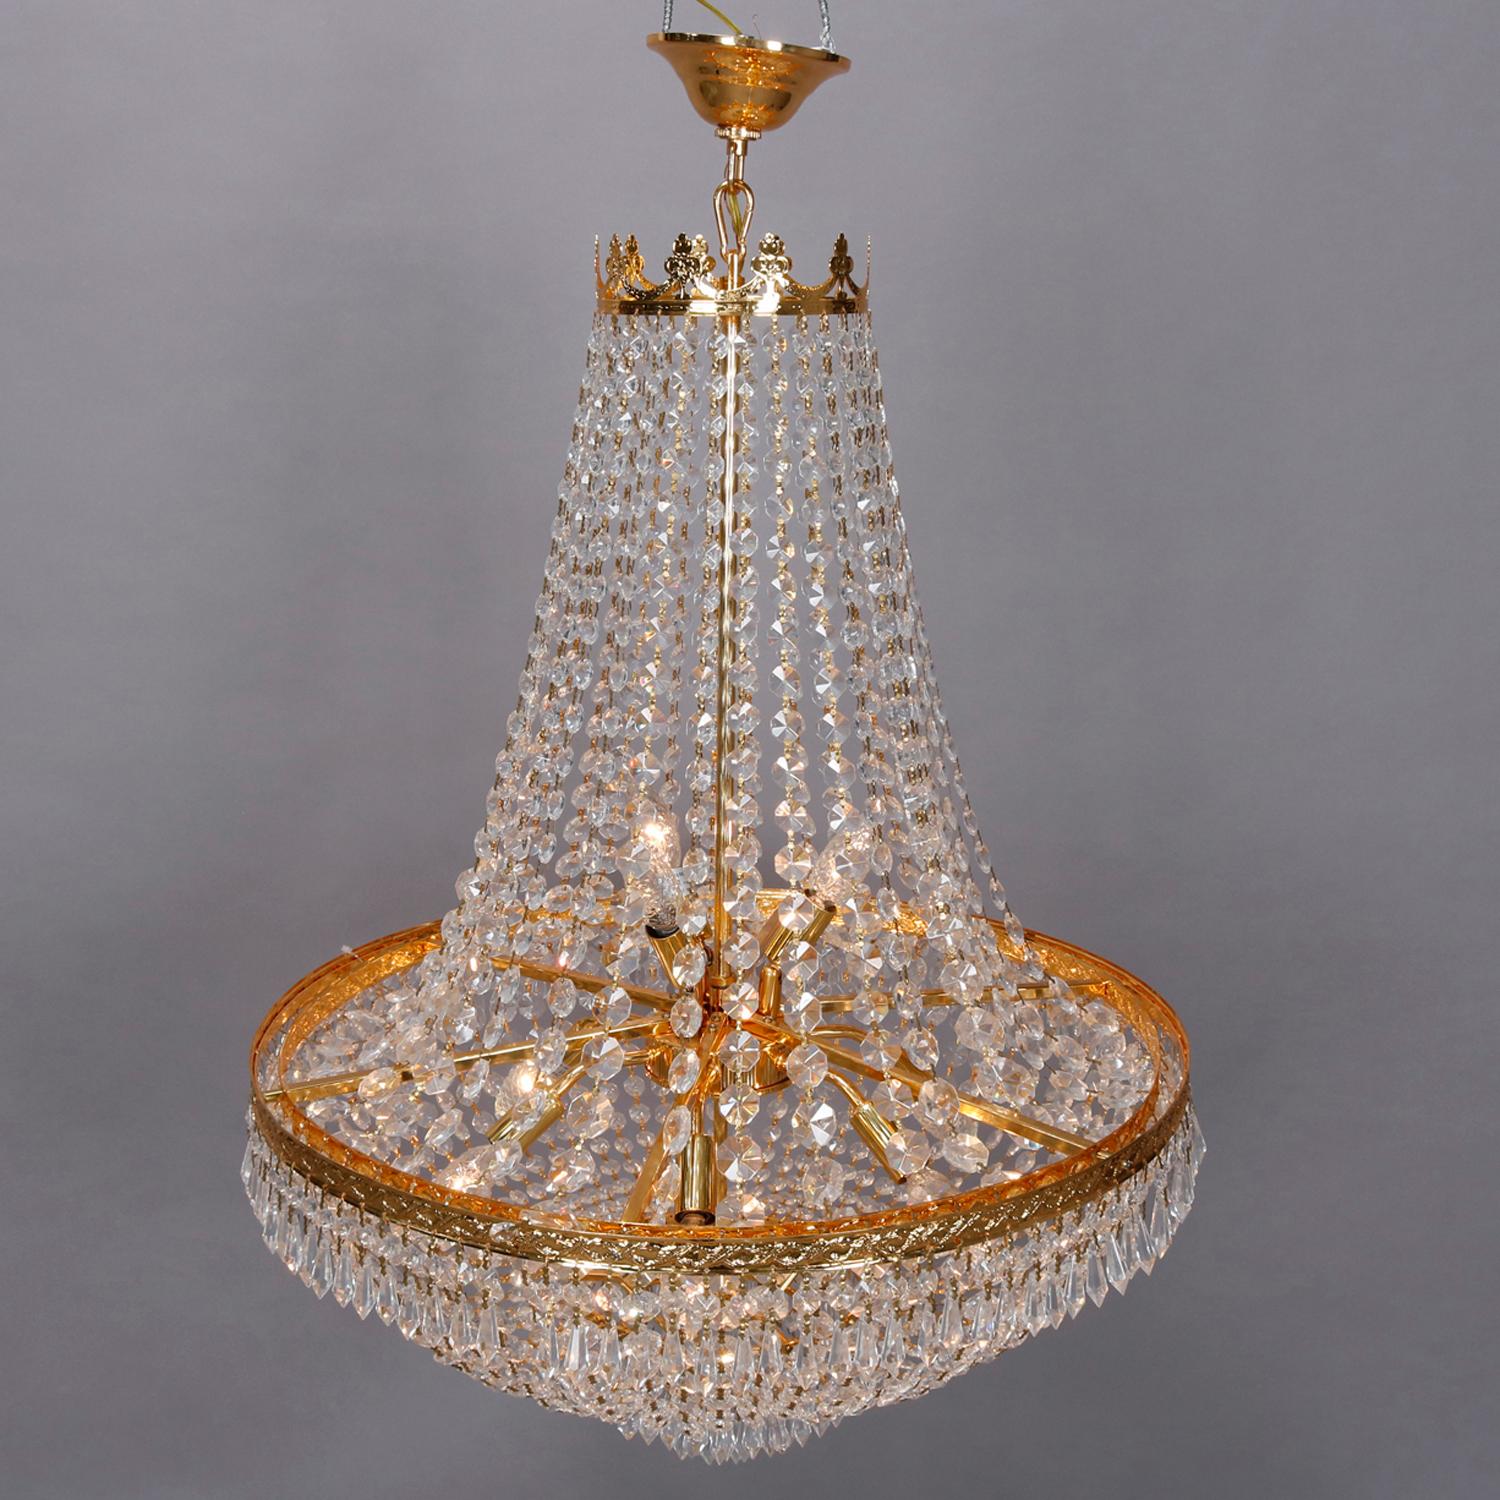 A vintage French Empire Sac a pearl form chandelier offers gold gilt metal frame with pierced crown surmounting strung pearl body housing eight lights, 20th century

Measures: 39